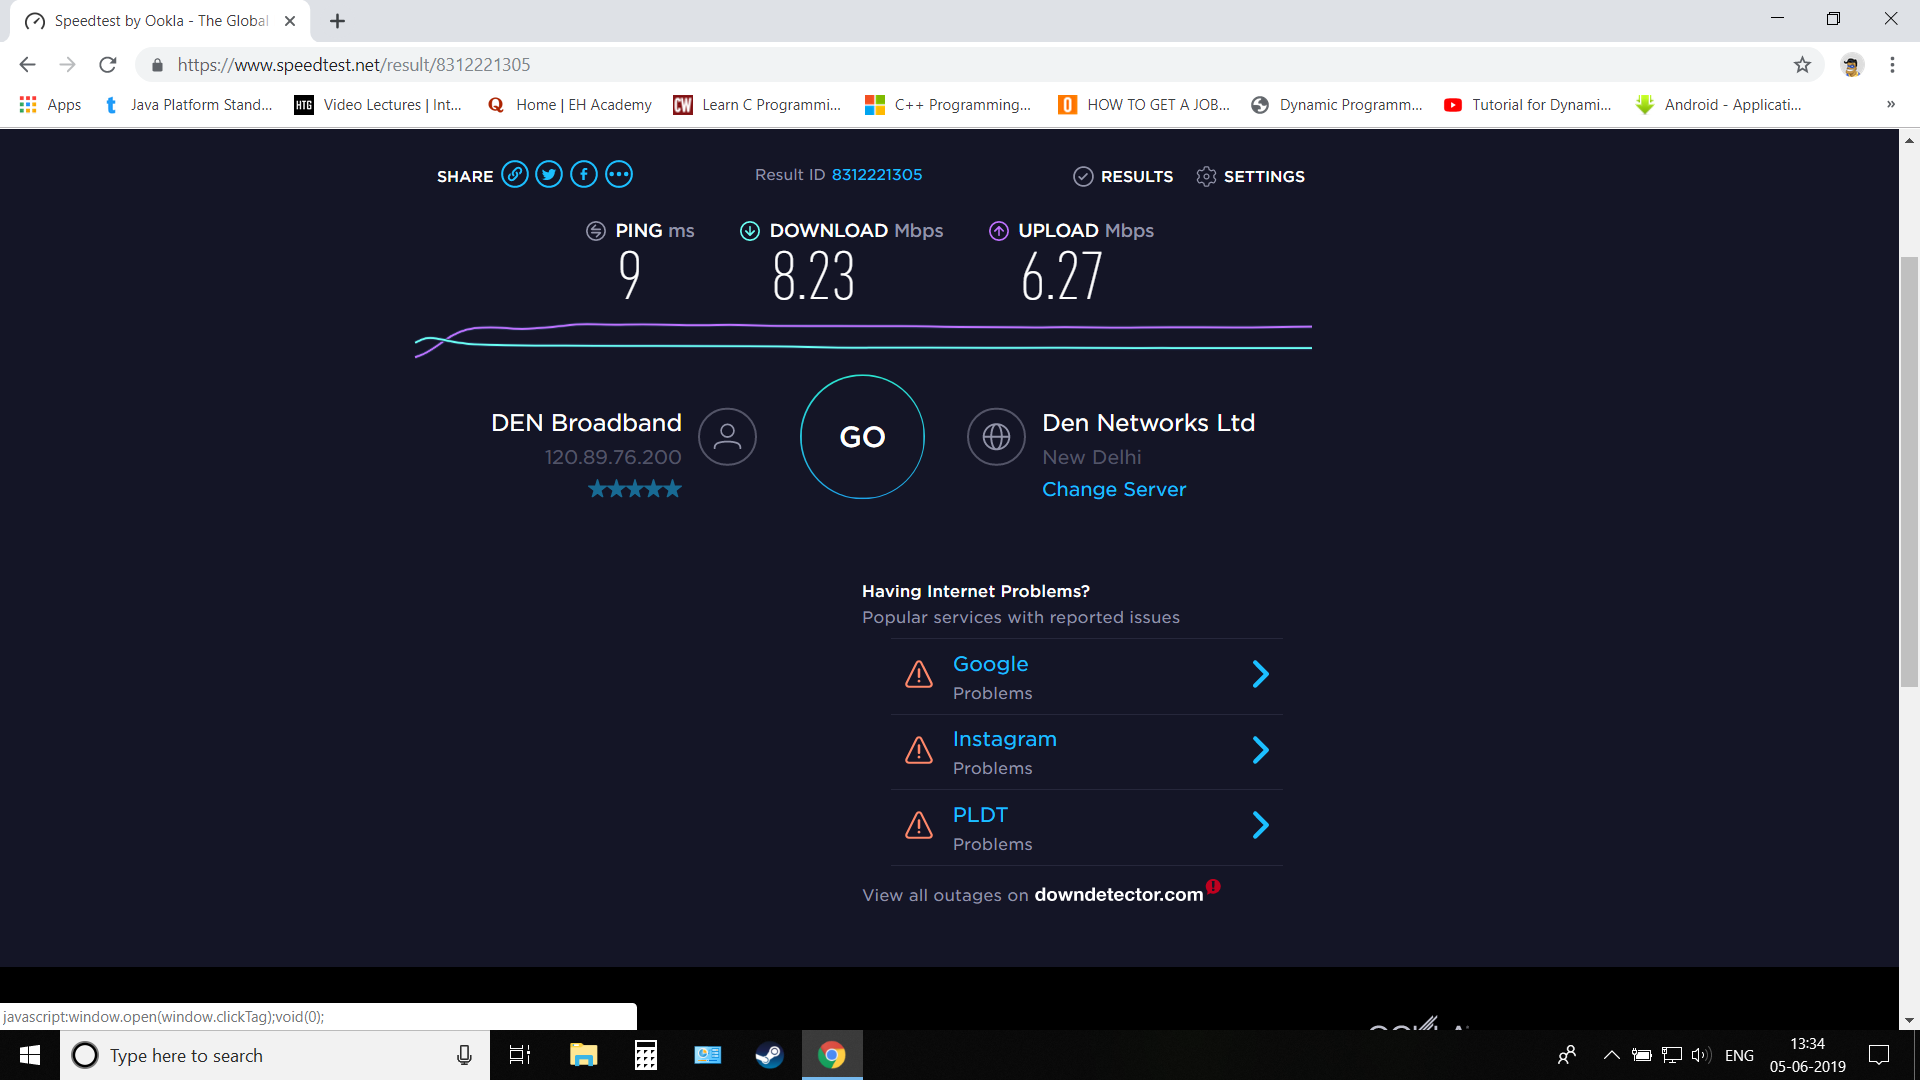 Slow download speeds in browsers and steam in windows 10 while getting complete speed on... aed65735-c251-47f0-adbe-c659d7465f56?upload=true.png